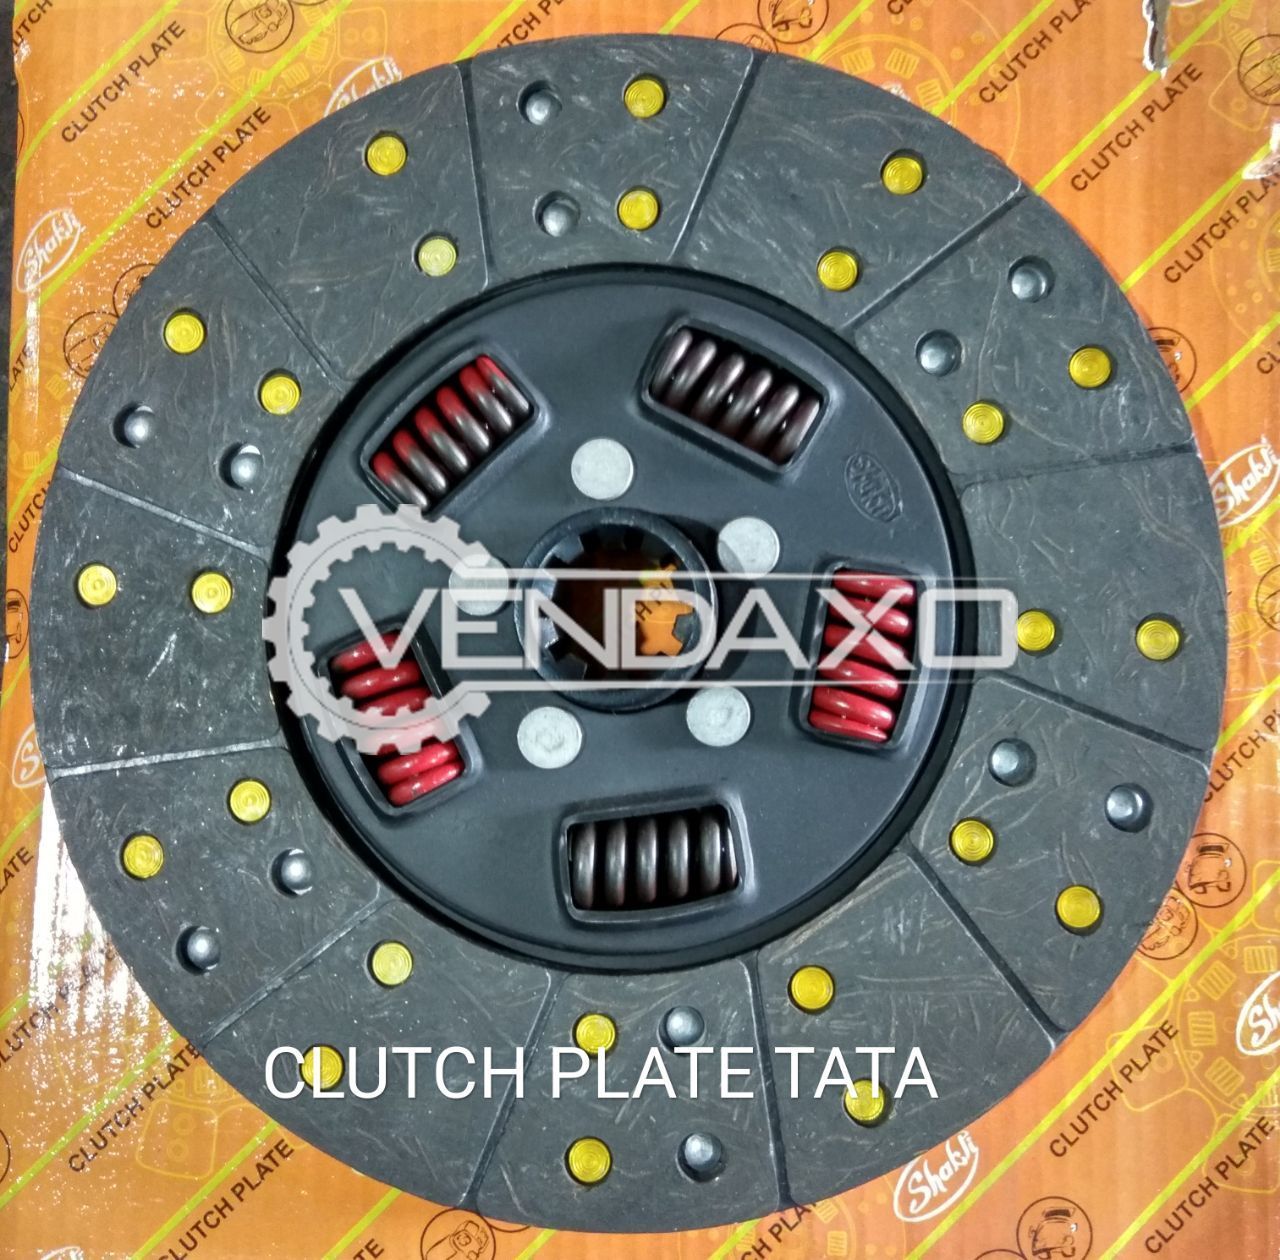 Complete Clutch Disc Manufacturing Plant rarely used is available for immediate sale